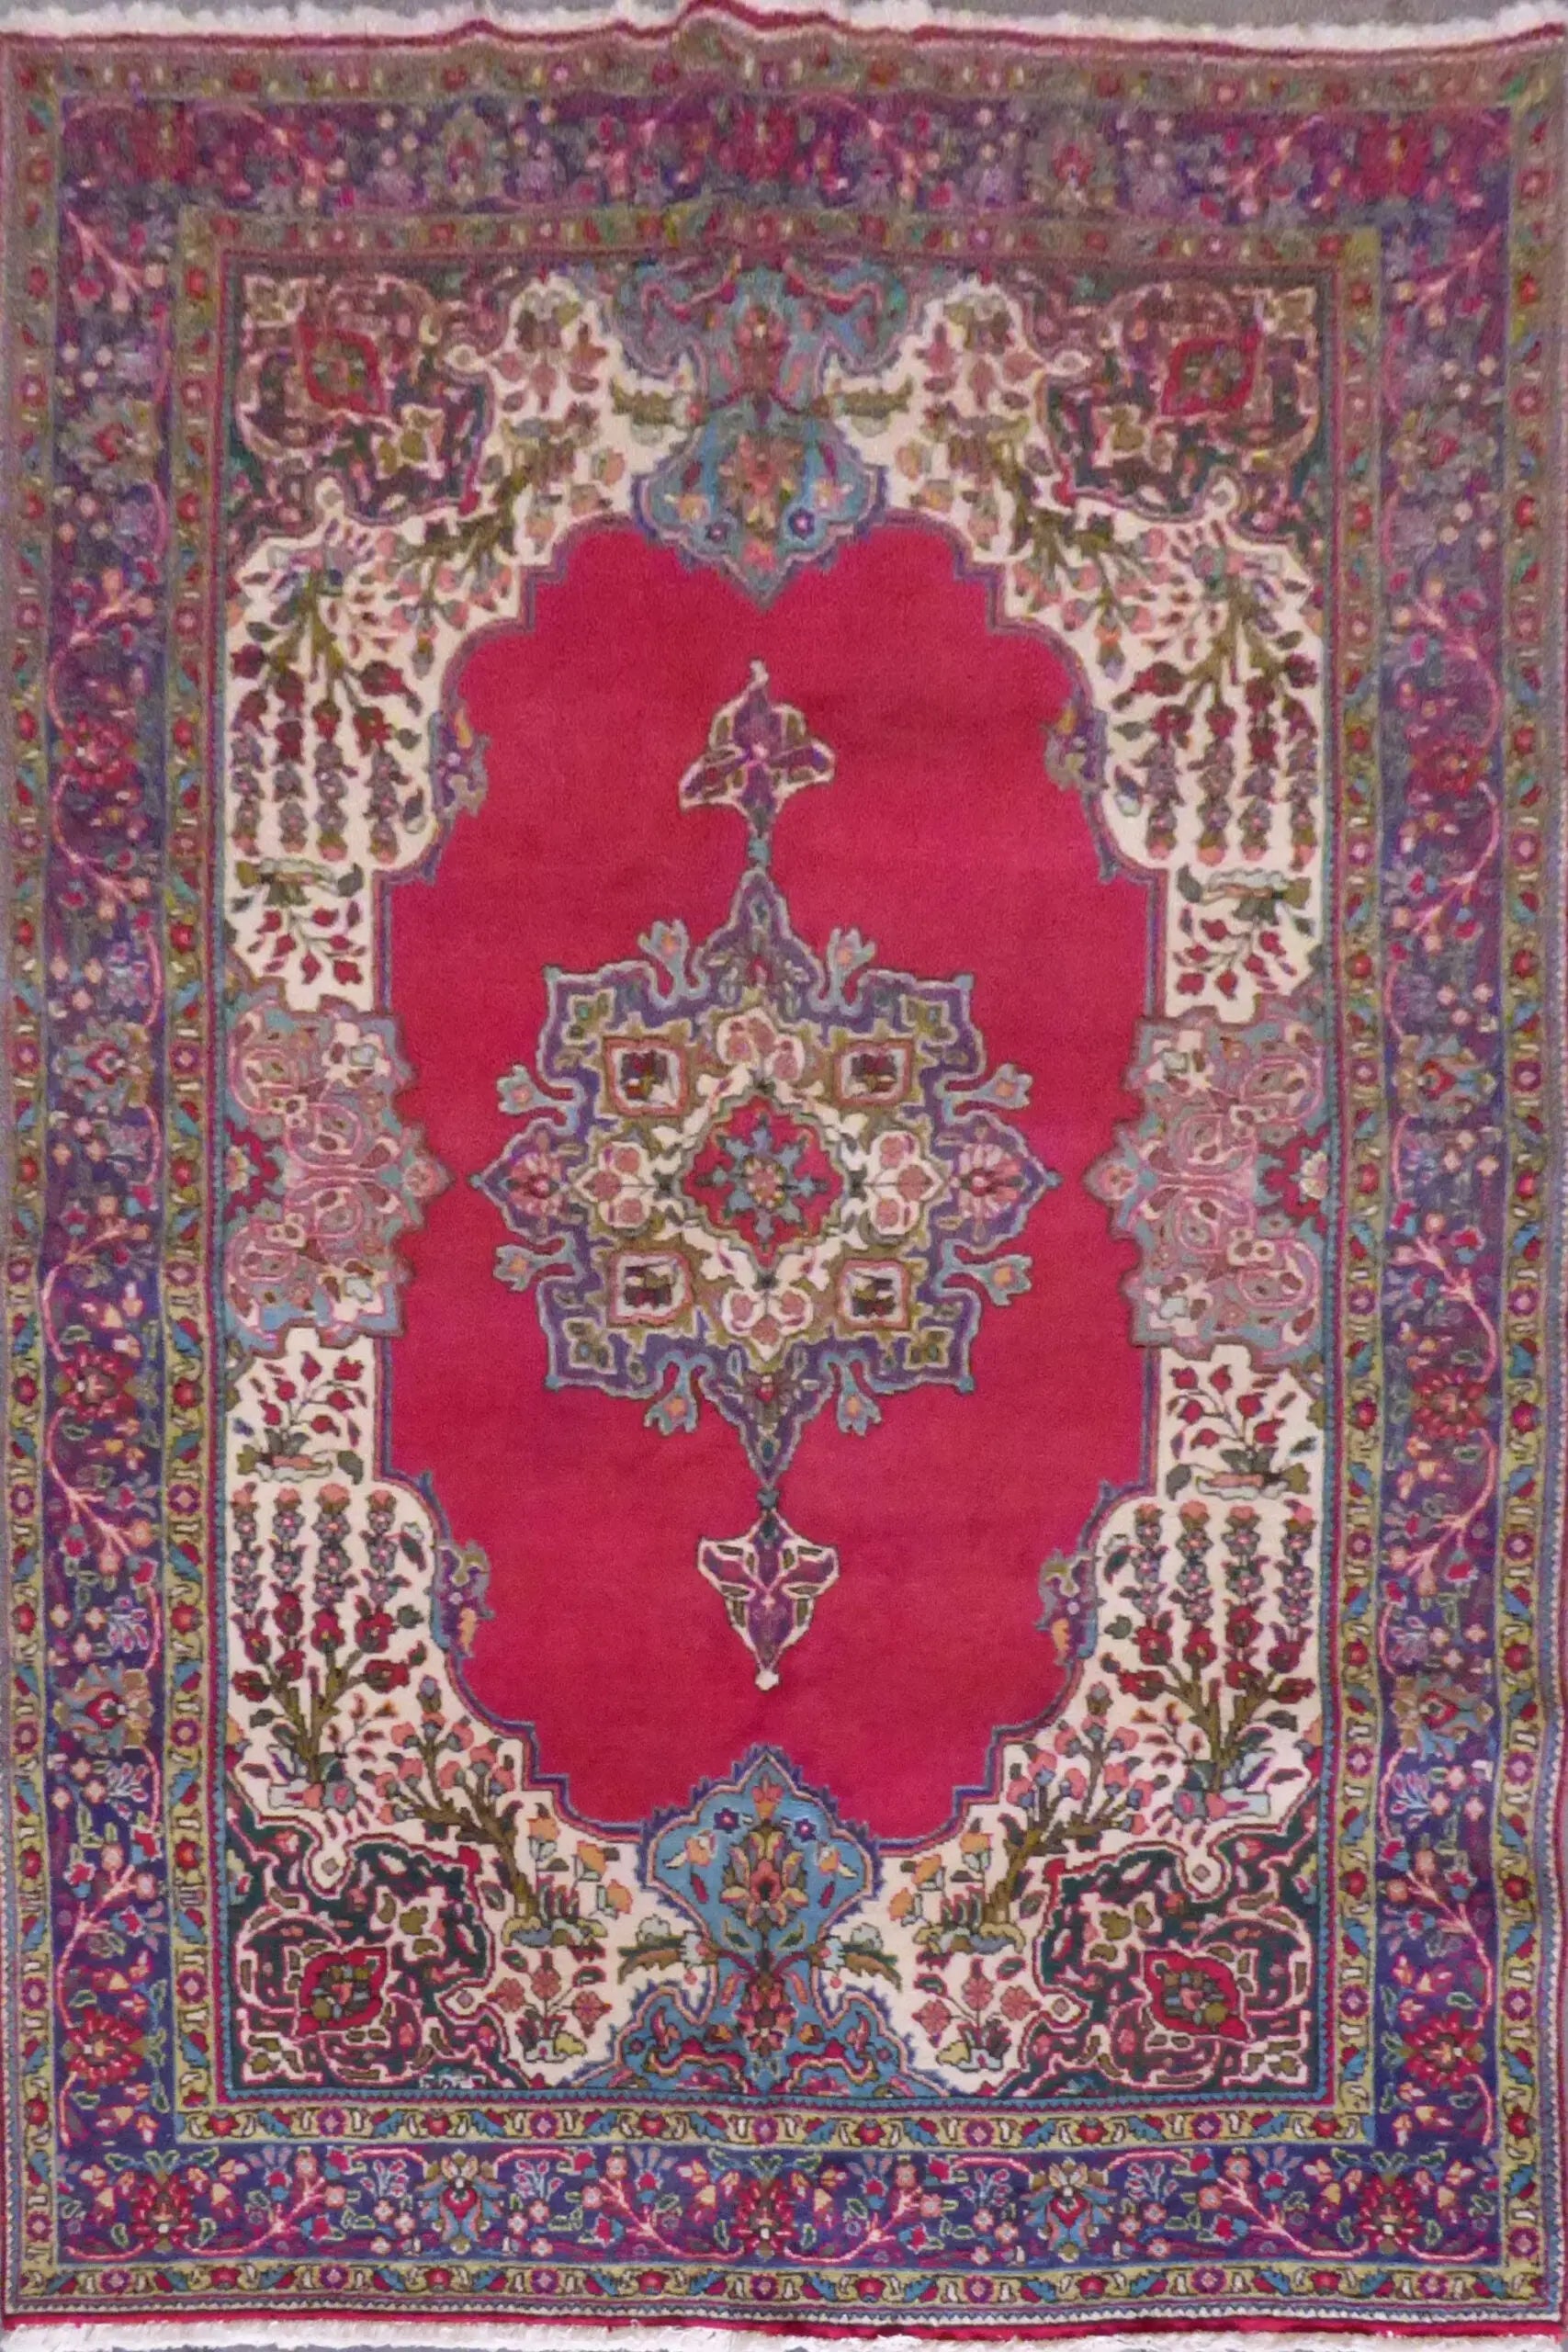 Trabiz Semi Antique Hand Knotted Persian Tabriz Rugs Red, 9'9" X 6'10", Panr02916 (Red : 10556)